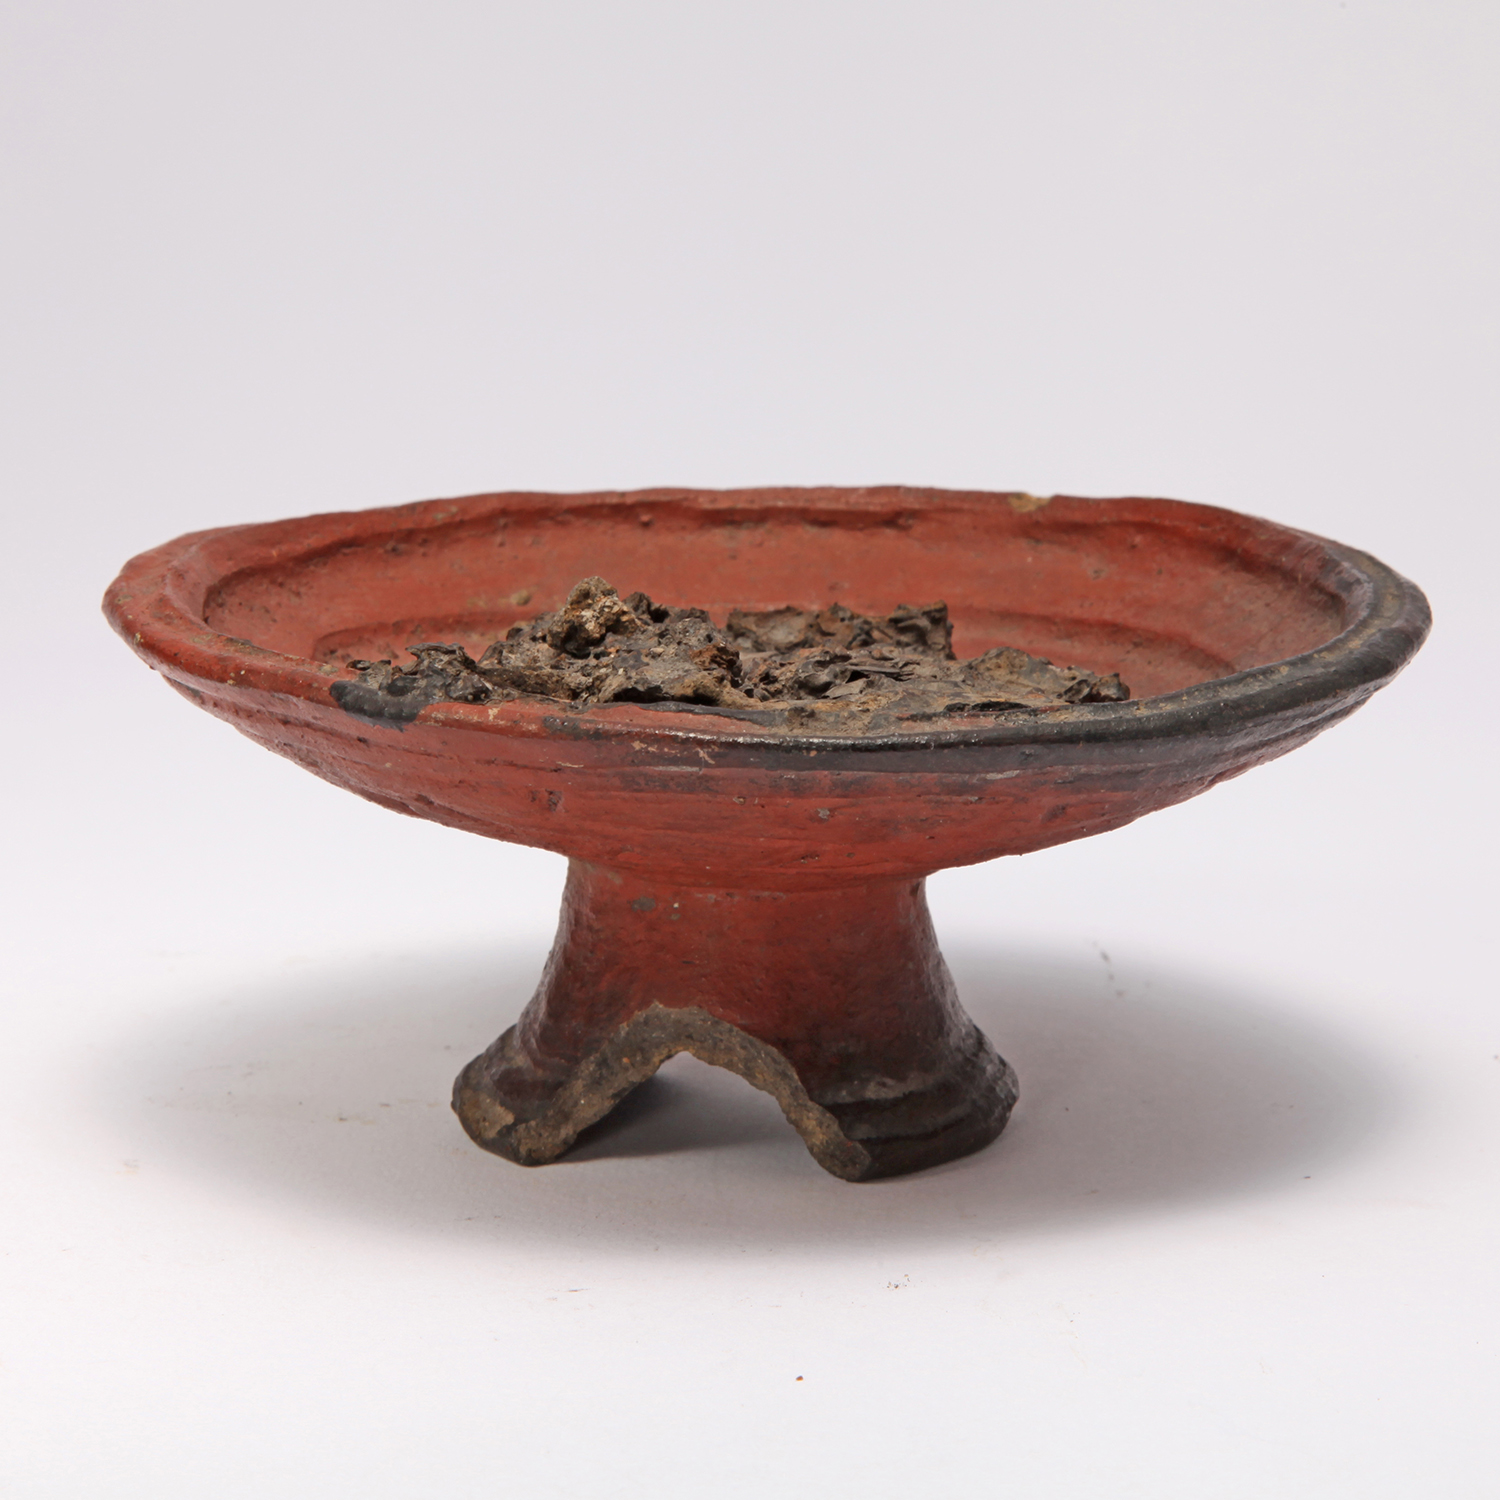 Shallow bowl earthenware with stand